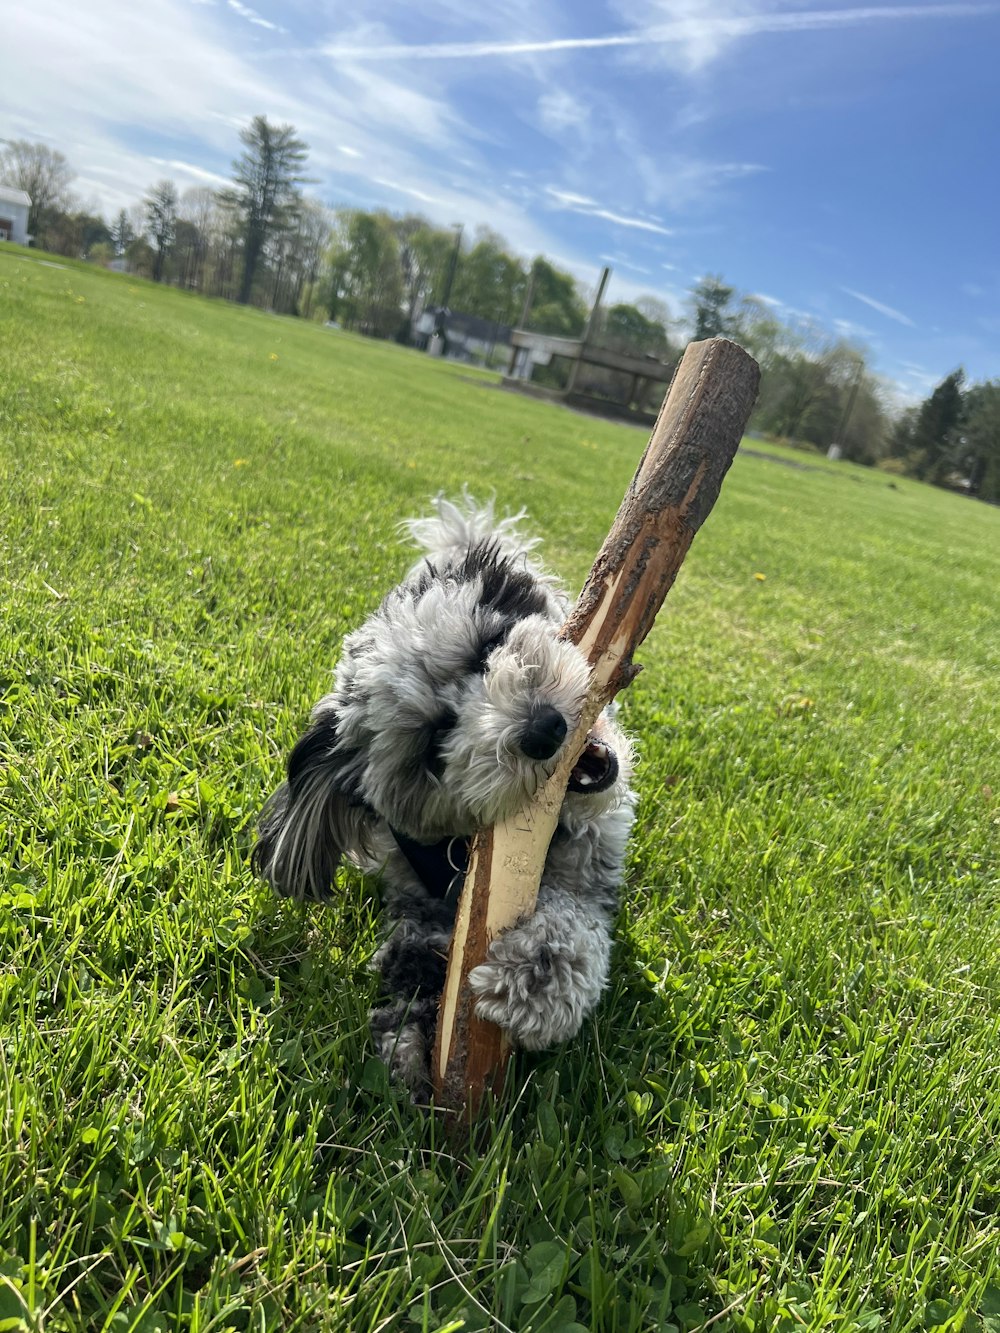 a stuffed animal holding a wooden stick in a field